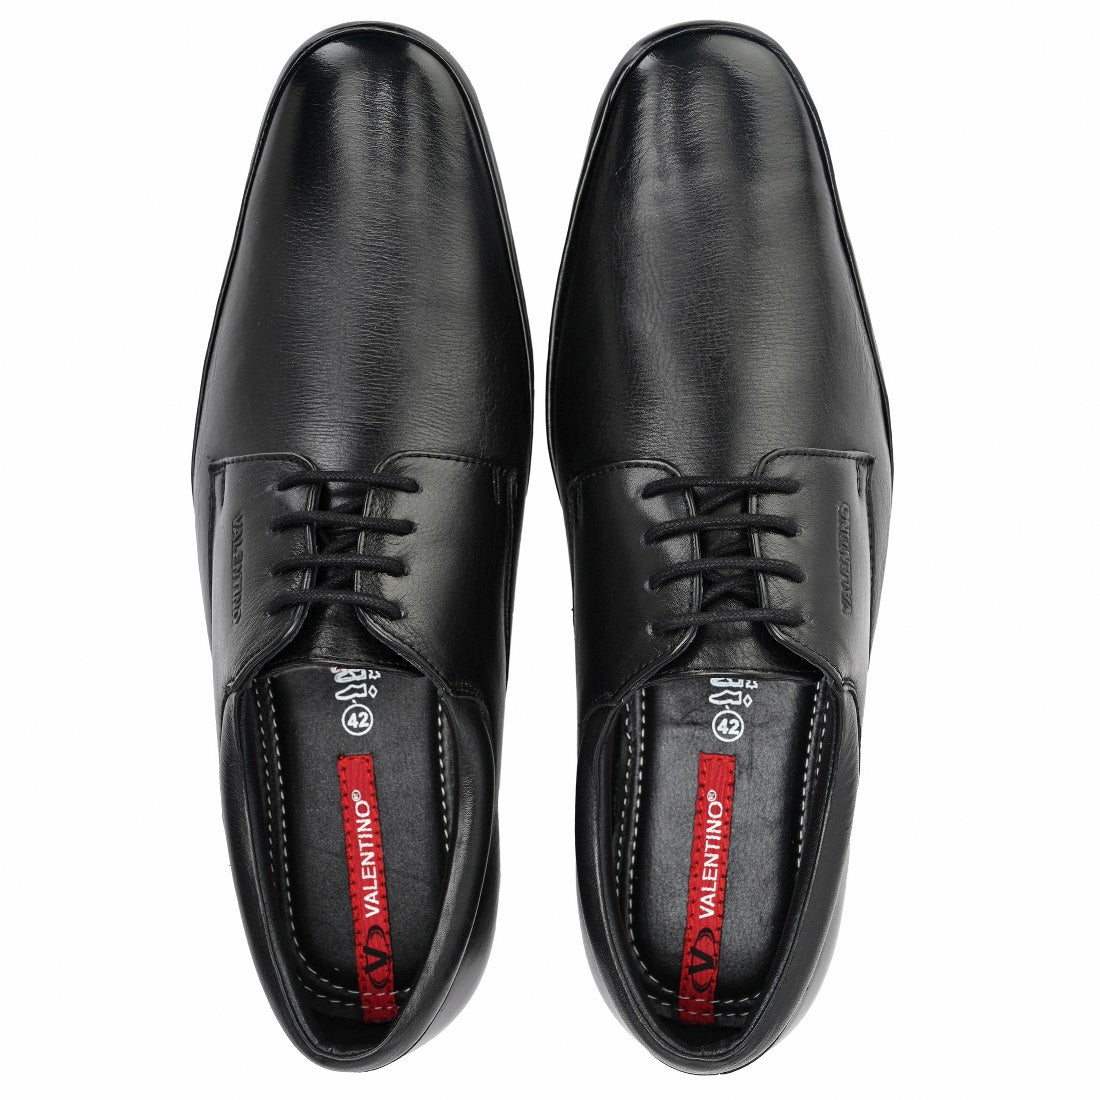 CALIFORNIA-52A MEN LEATHER BLACK FORMAL LACE UP DERBY